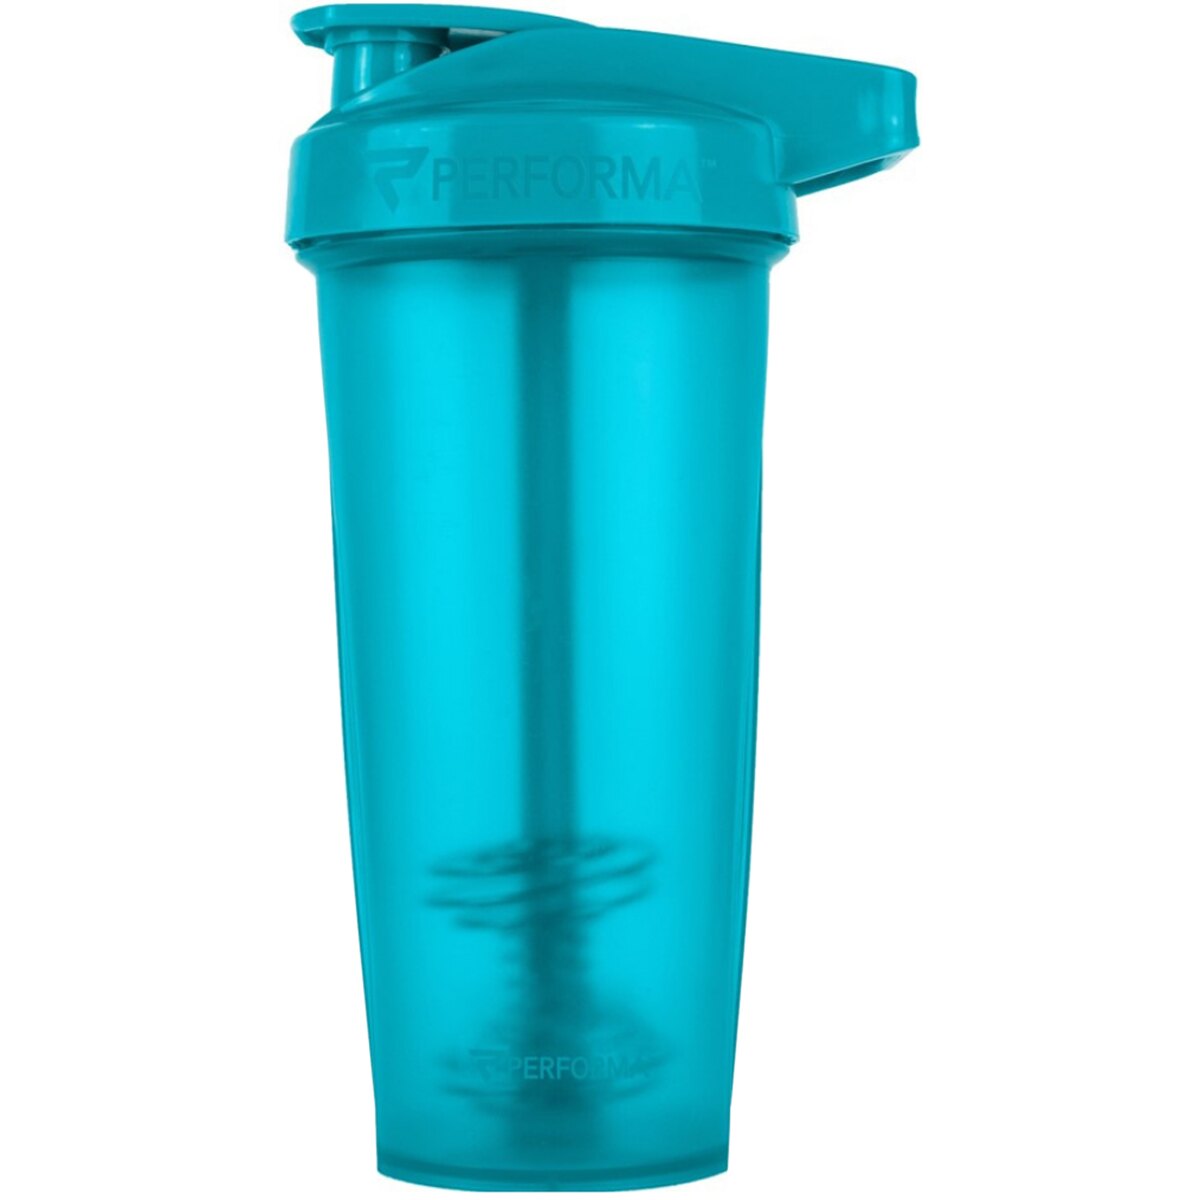 9080163 Performa Activ Classic Collection Shaker Cup, Teal - 28 Oz